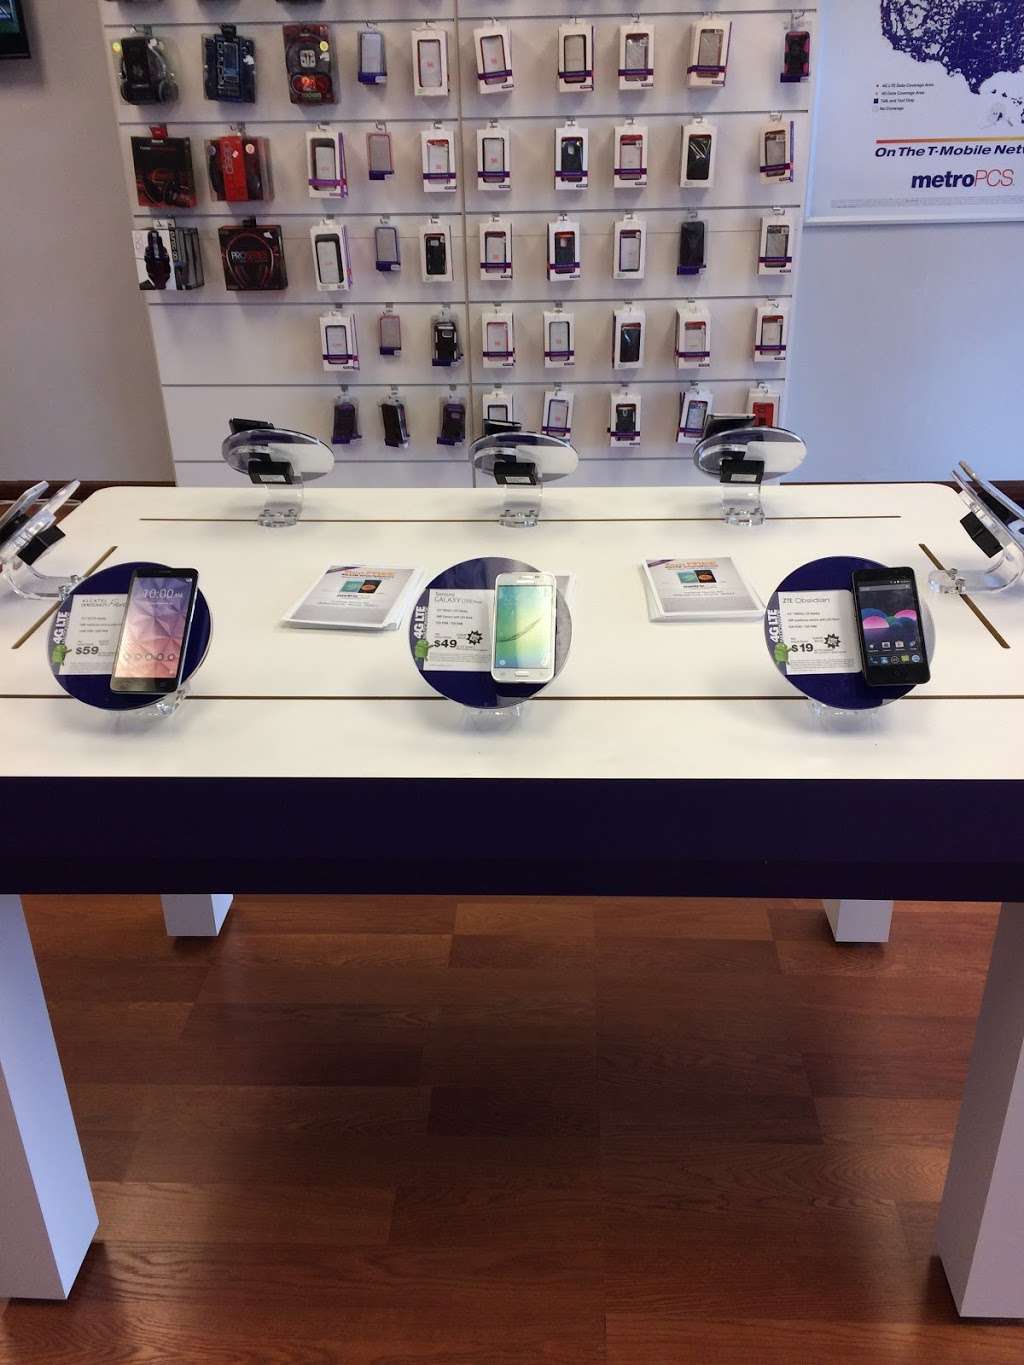 MetroPCS | 10S628 Route 83, Willowbrook, IL 60527, USA | Phone: (630) 468-2804